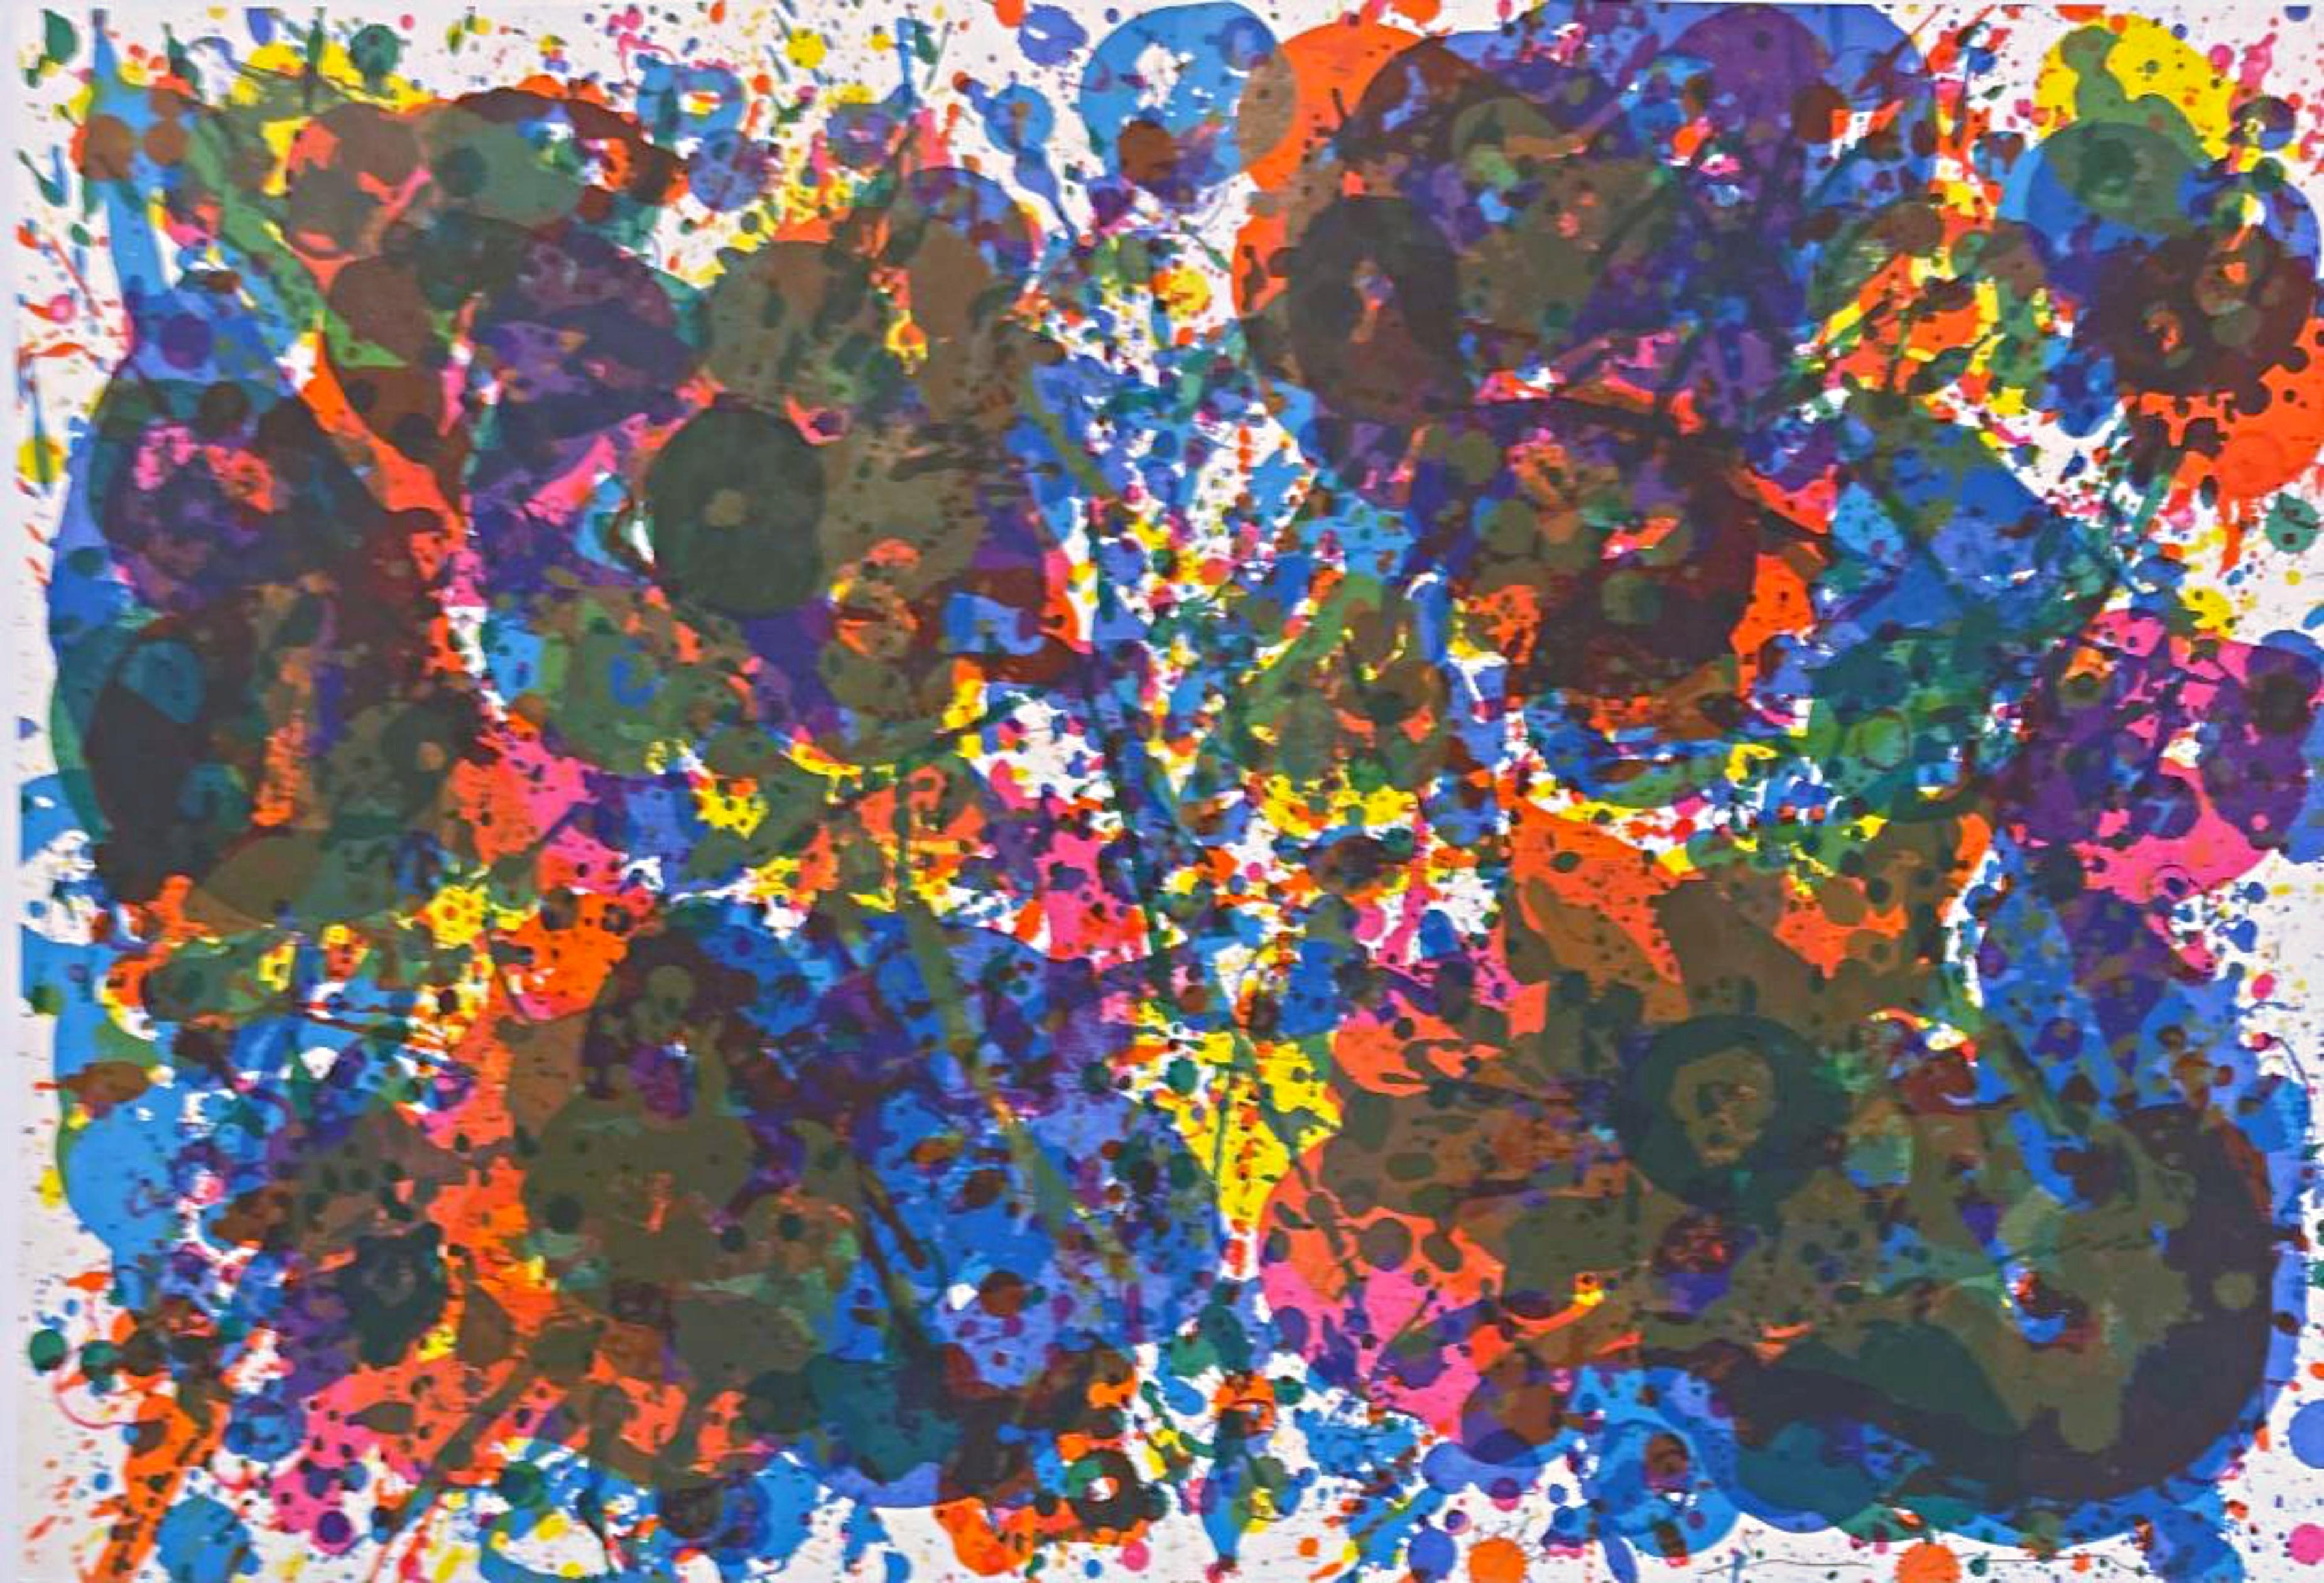 Sam Francis Print - Deluxe Hand Signed & Numbered 25/30 Cat: Lembark 155 Carnegie Museum lithograph